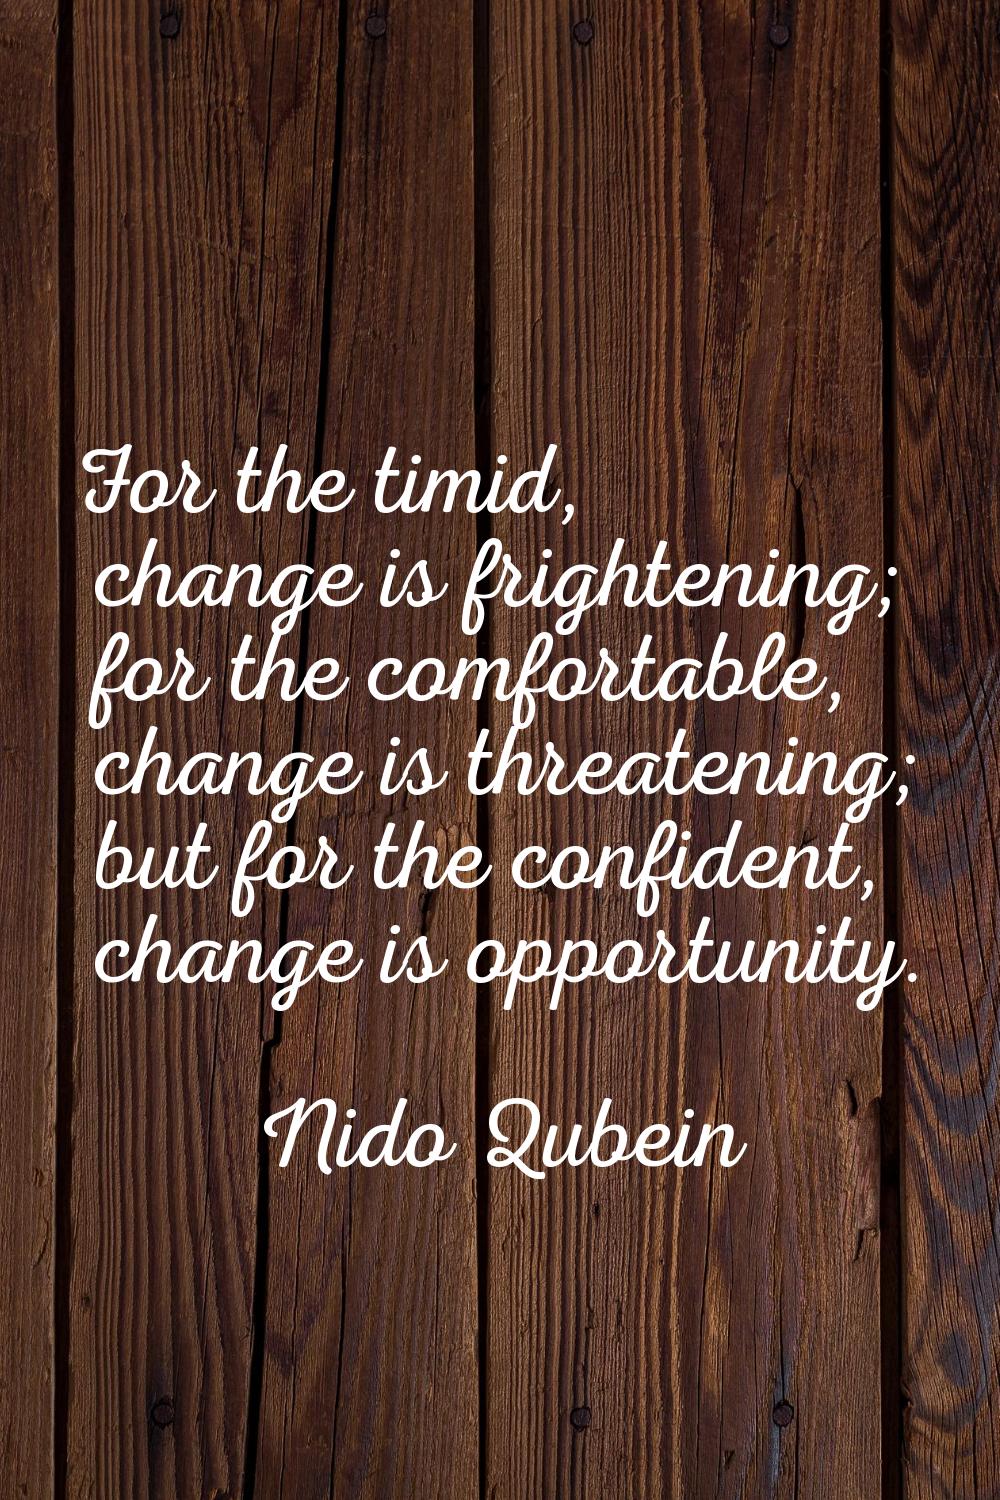 For the timid, change is frightening; for the comfortable, change is threatening; but for the confi